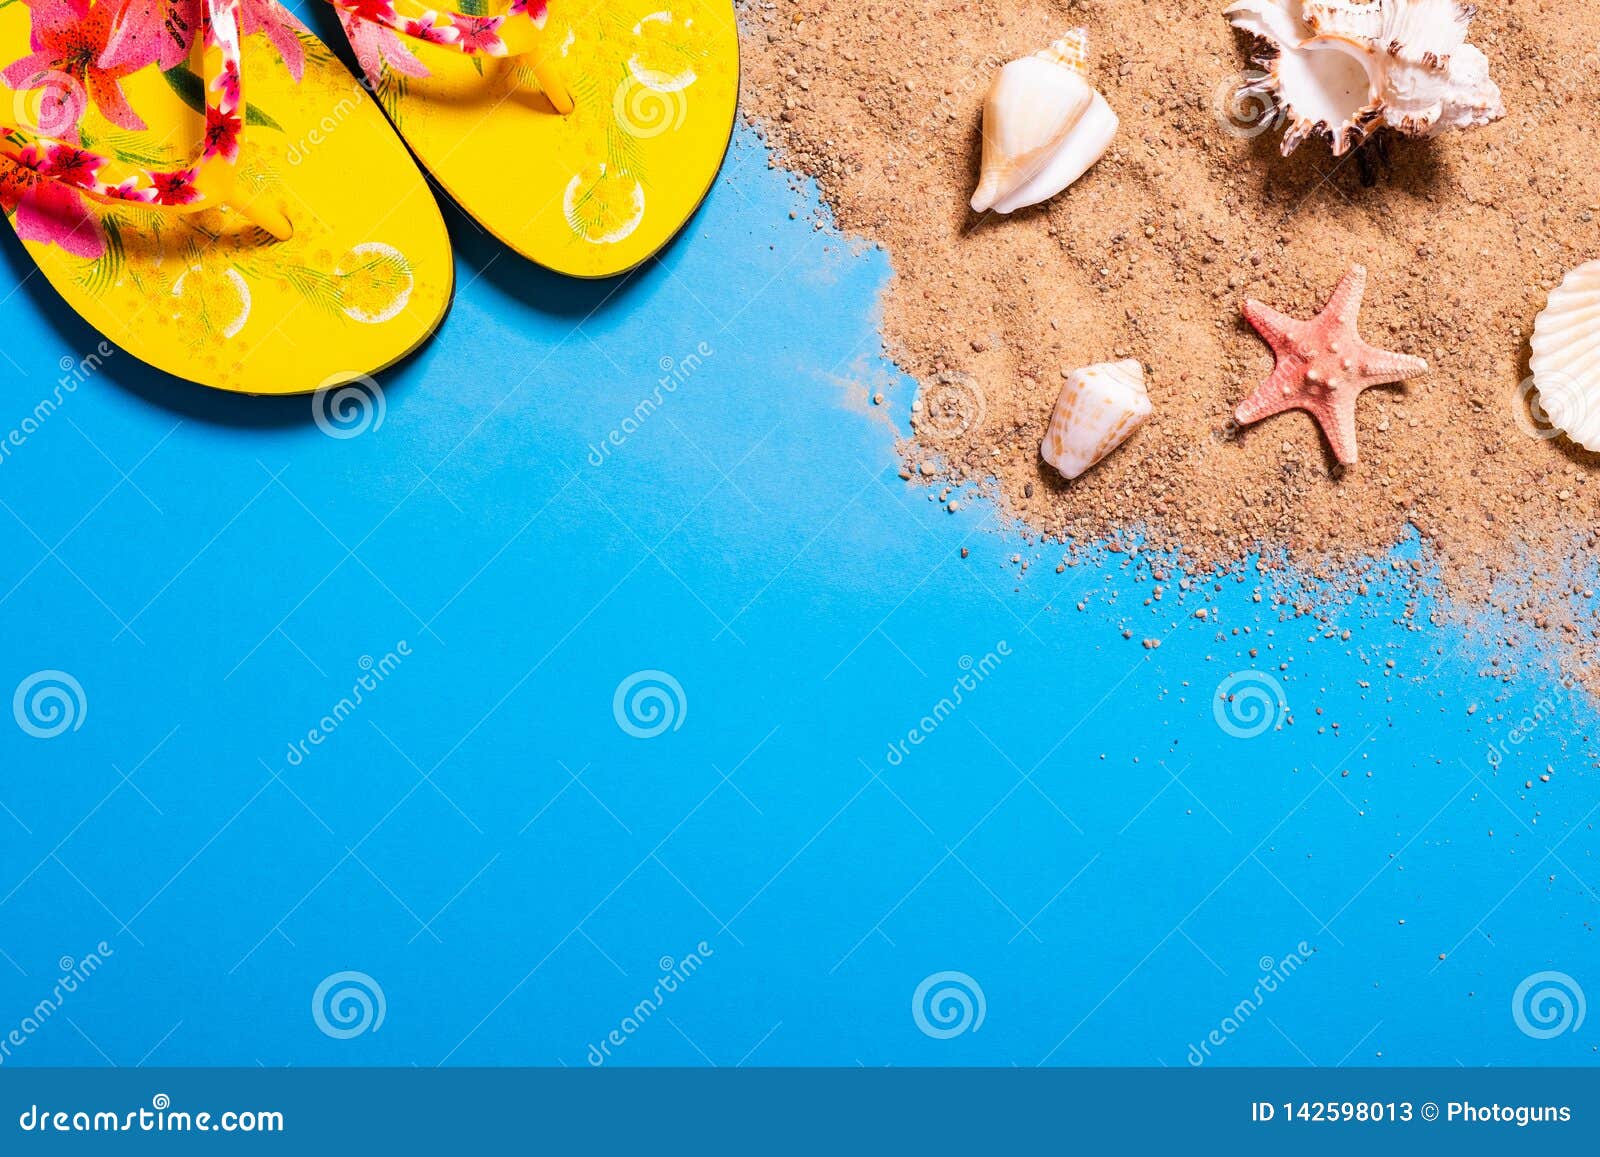 Summer Vacation Concept with Seashells, Starfish and Women`s Beach ...